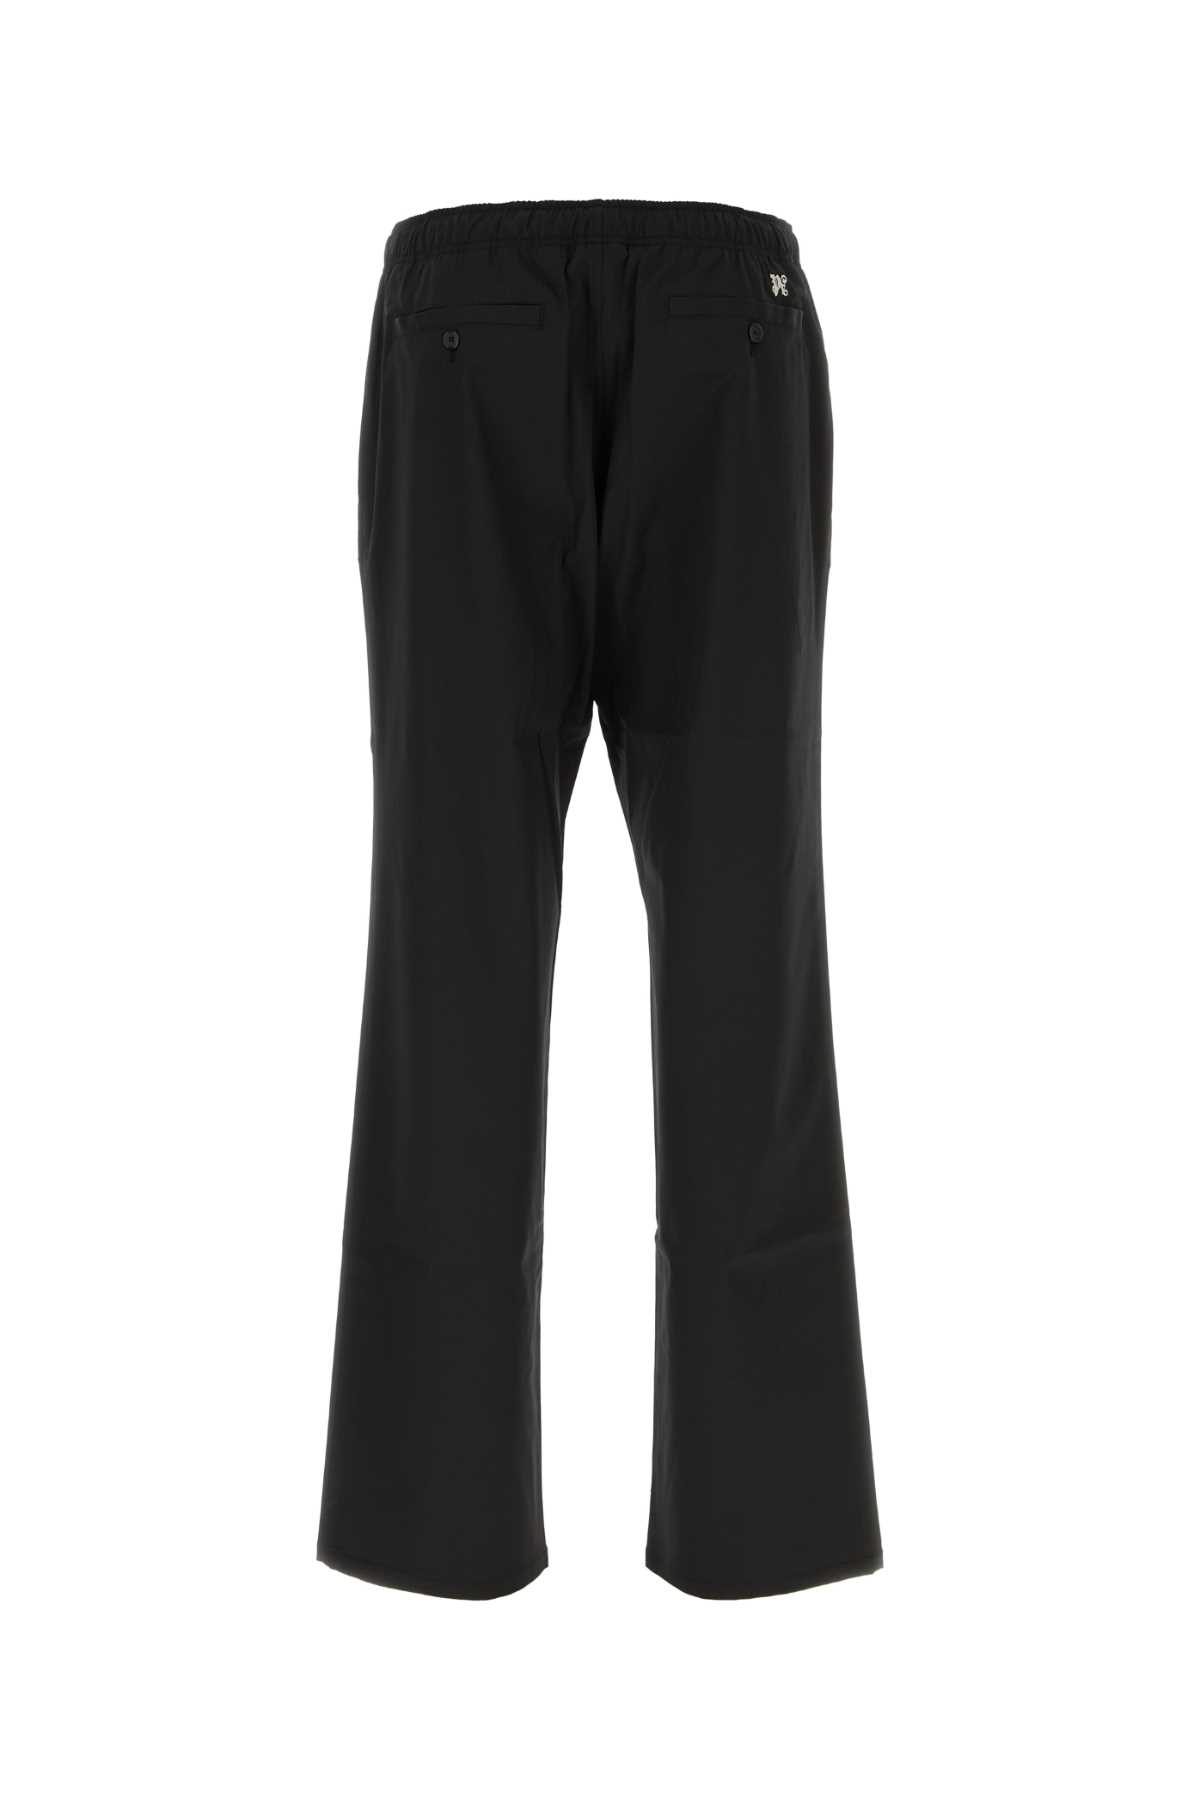 Palm Angels Black Stretch Polyester Blend Pant In Blackblac